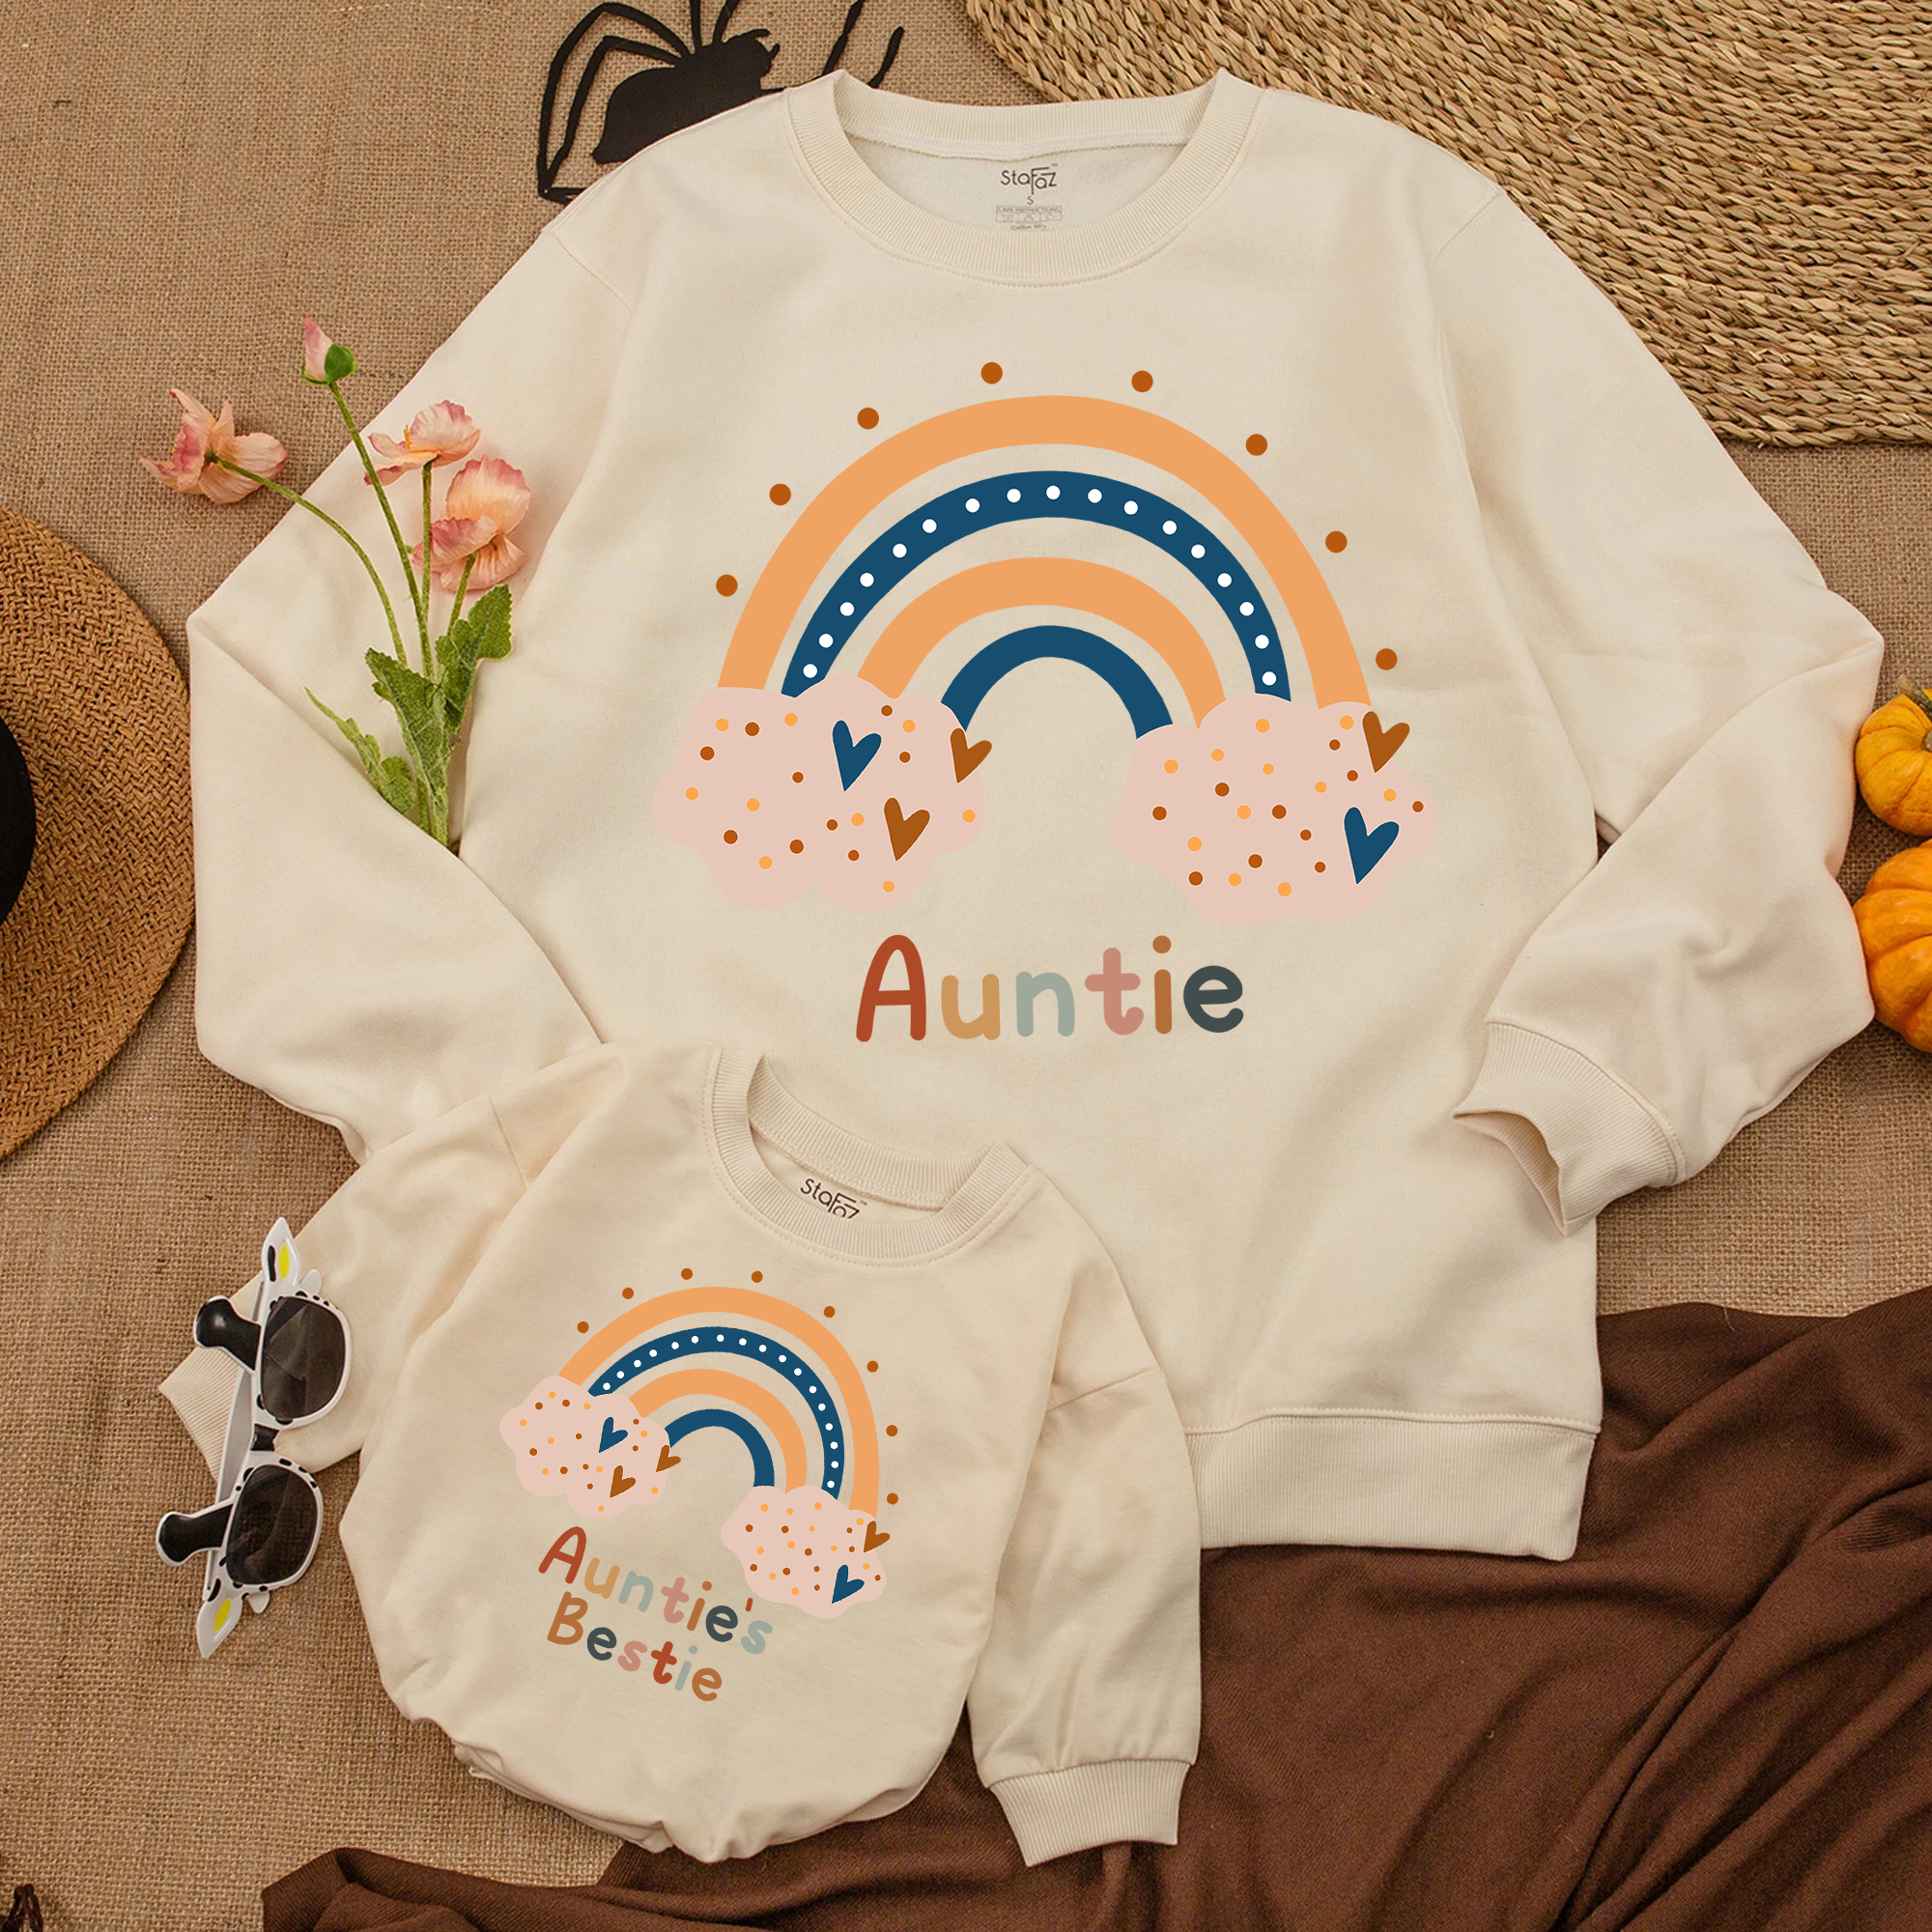 Personalized Auntie & Bestie Romper Matching: Rainbow Matching Outfit